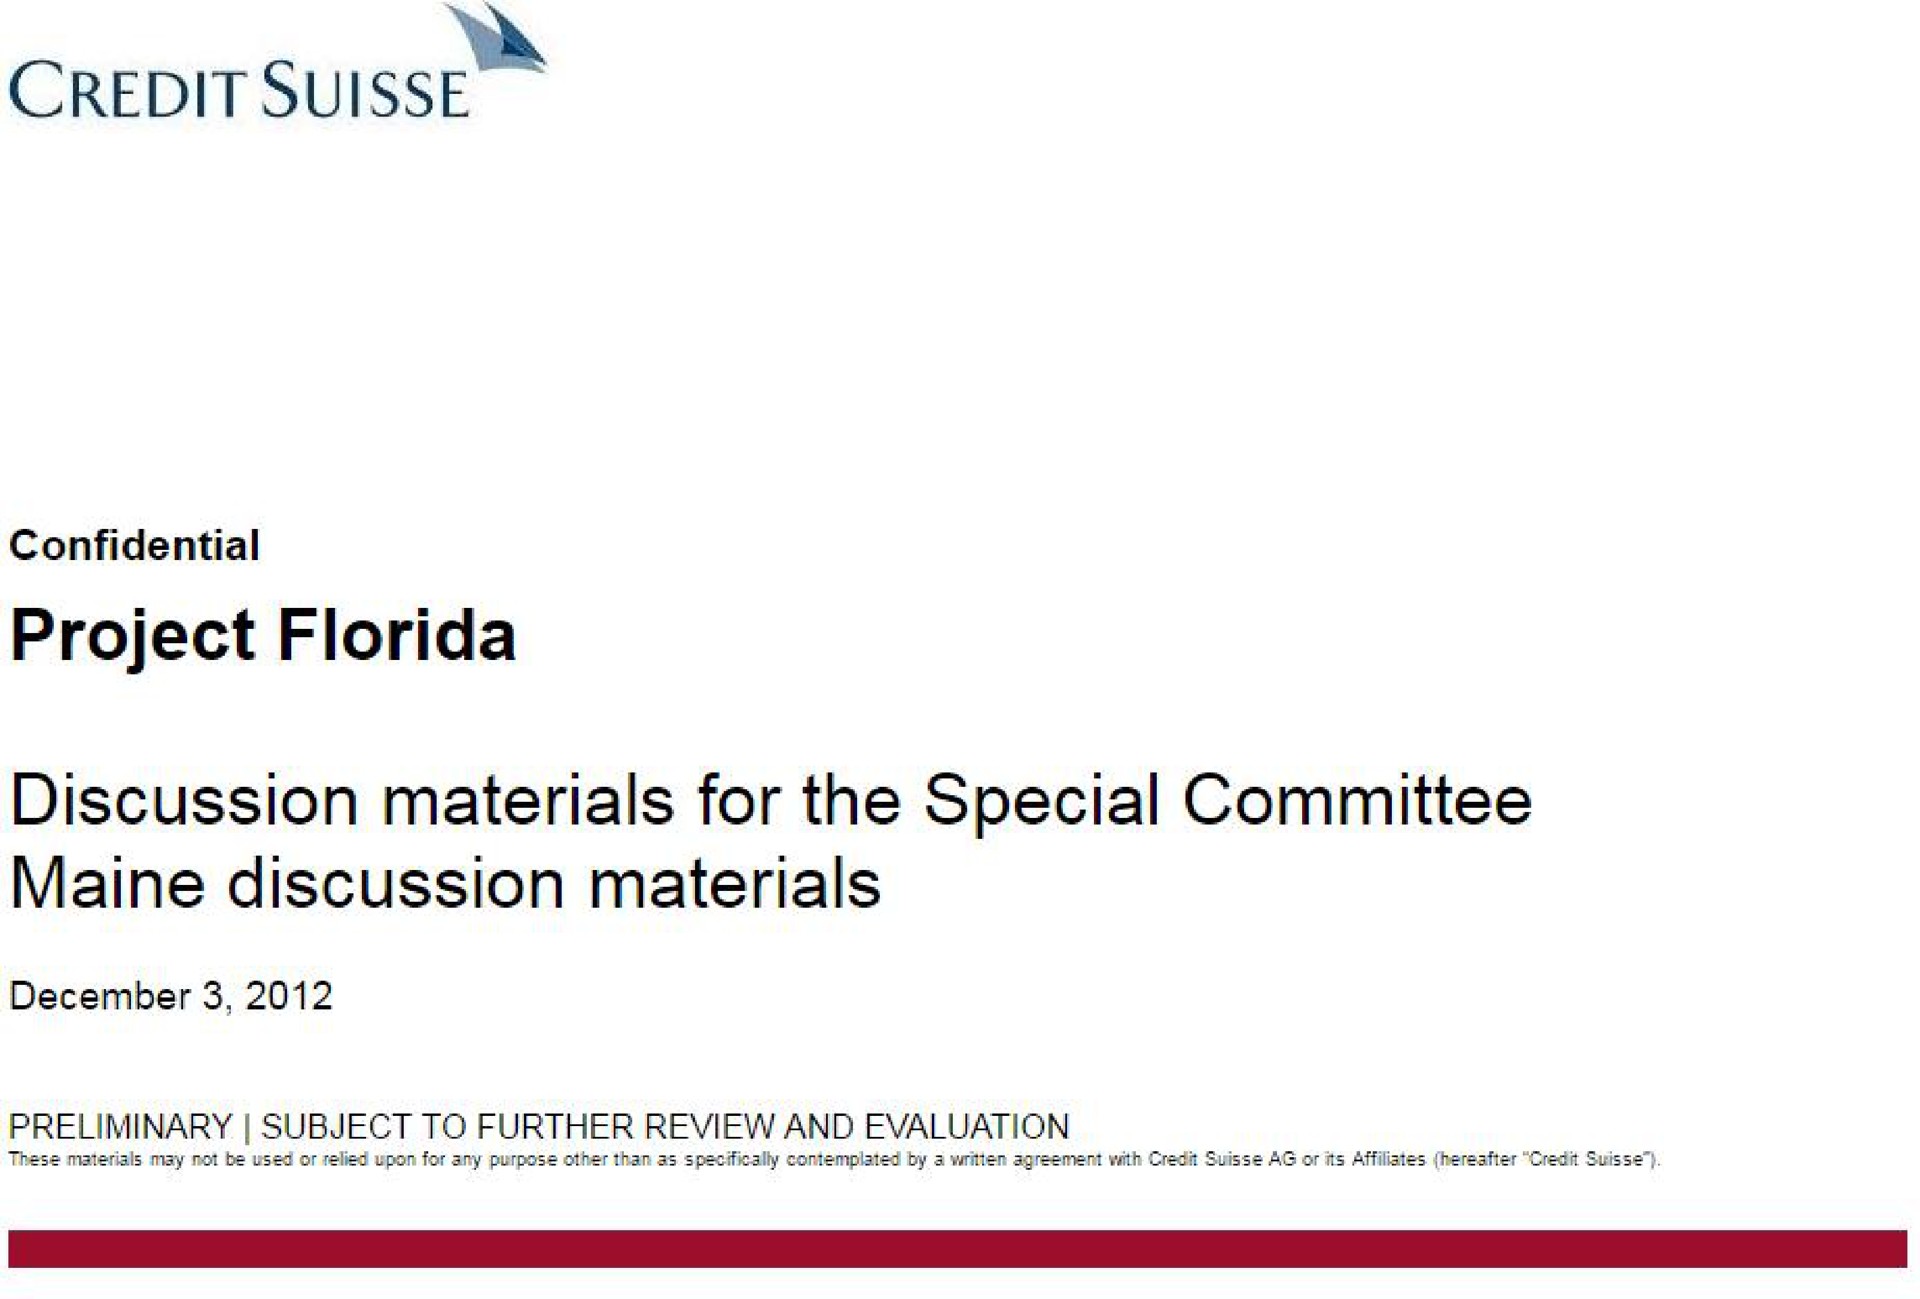 credit project discussion materials for the special committee discussion materials | Credit Suisse